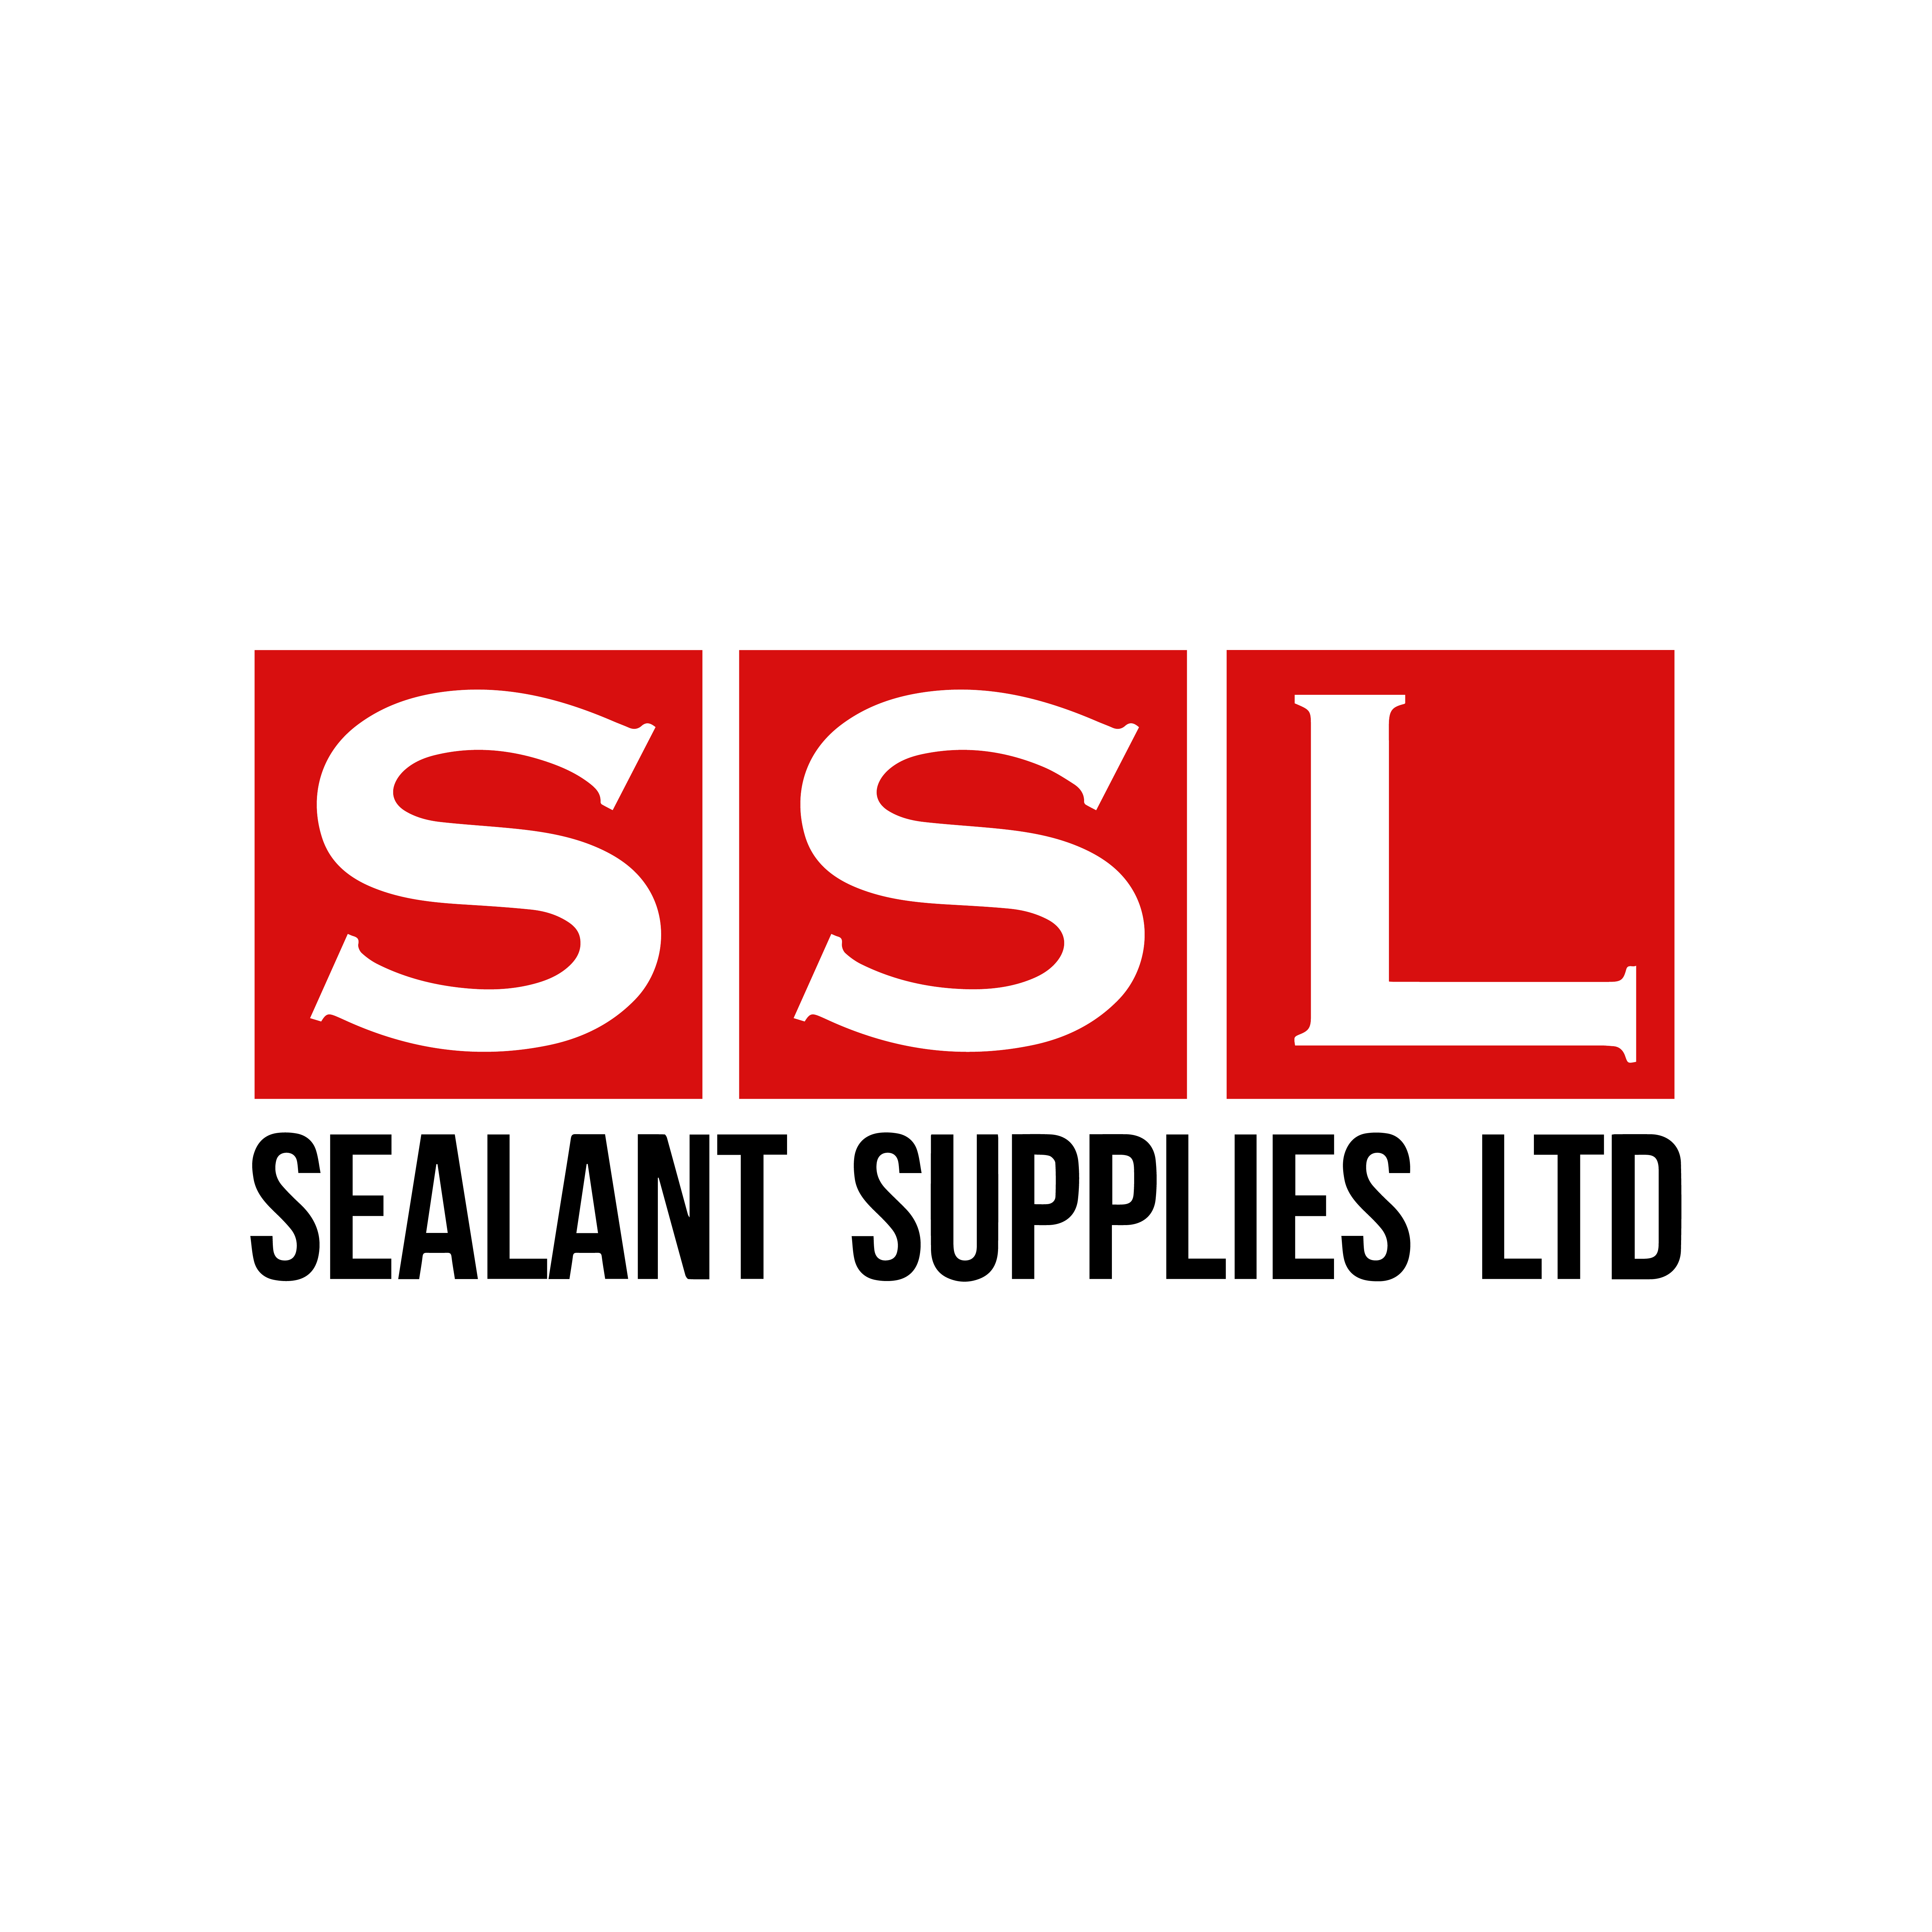 Signs you might be an SSL super fan &#8211; #1 You cant wait to read our first quarterly blog!